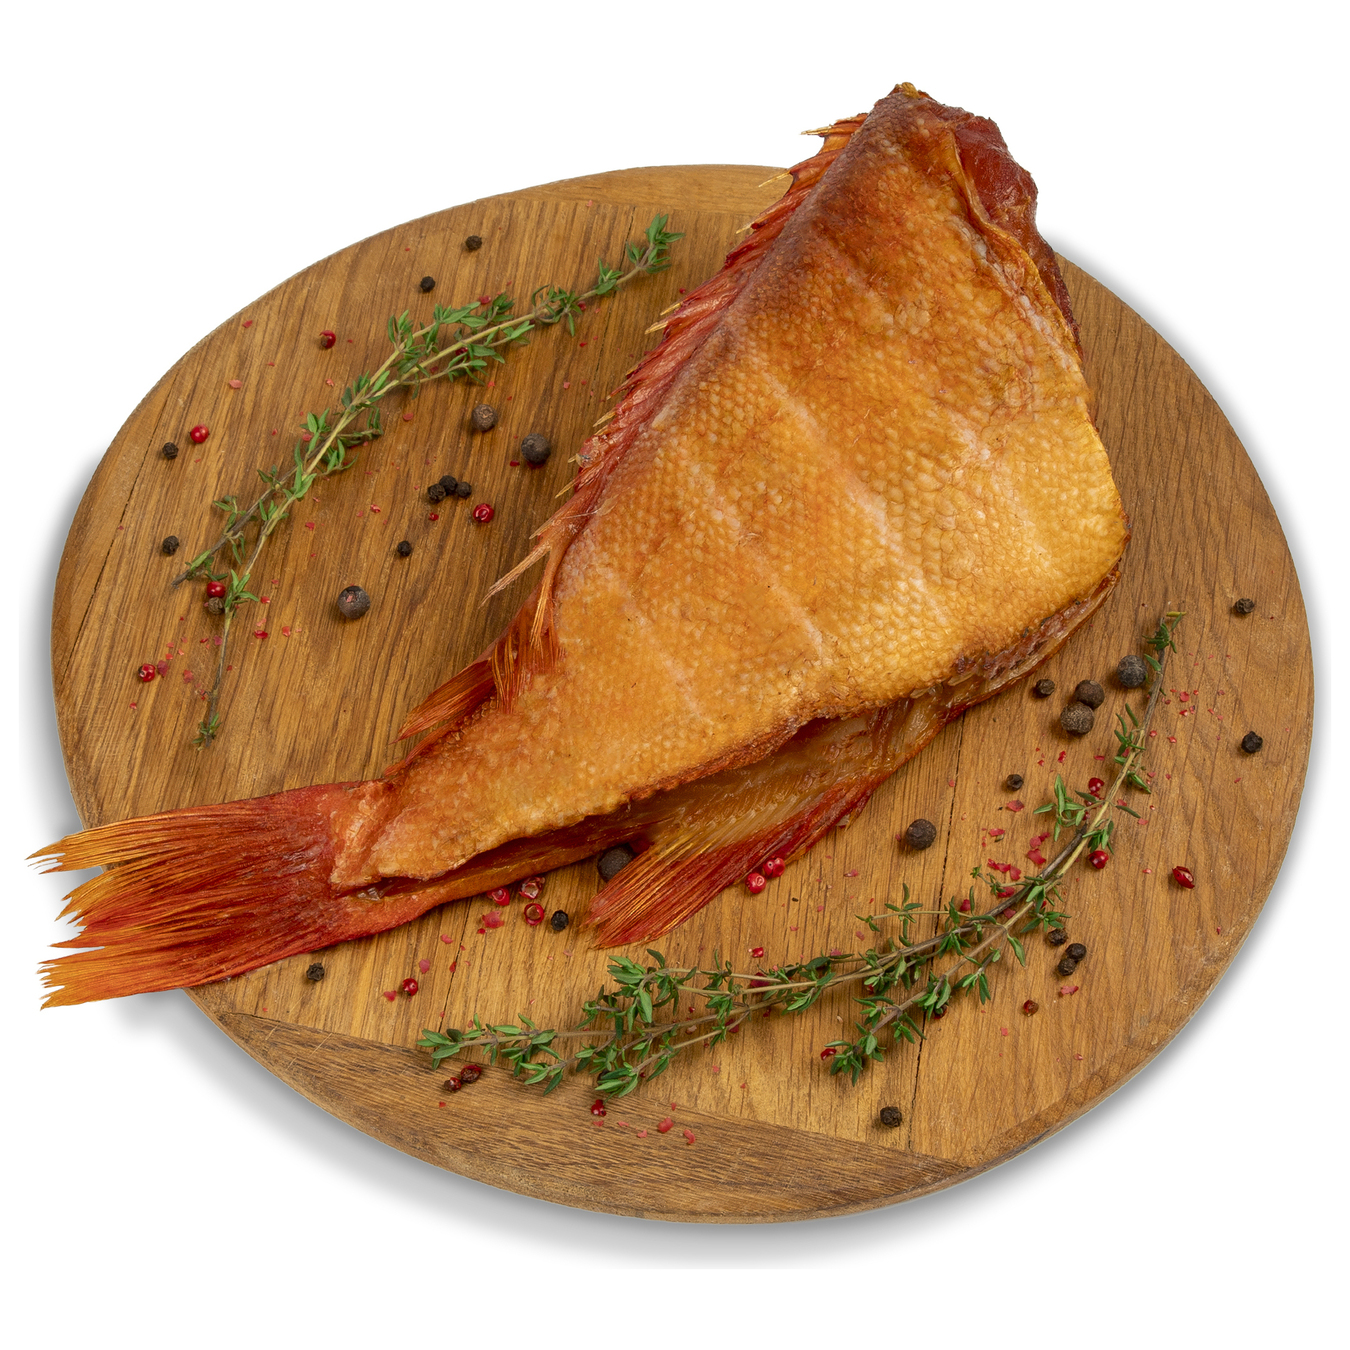 Cold-smoked pike perch of our own production